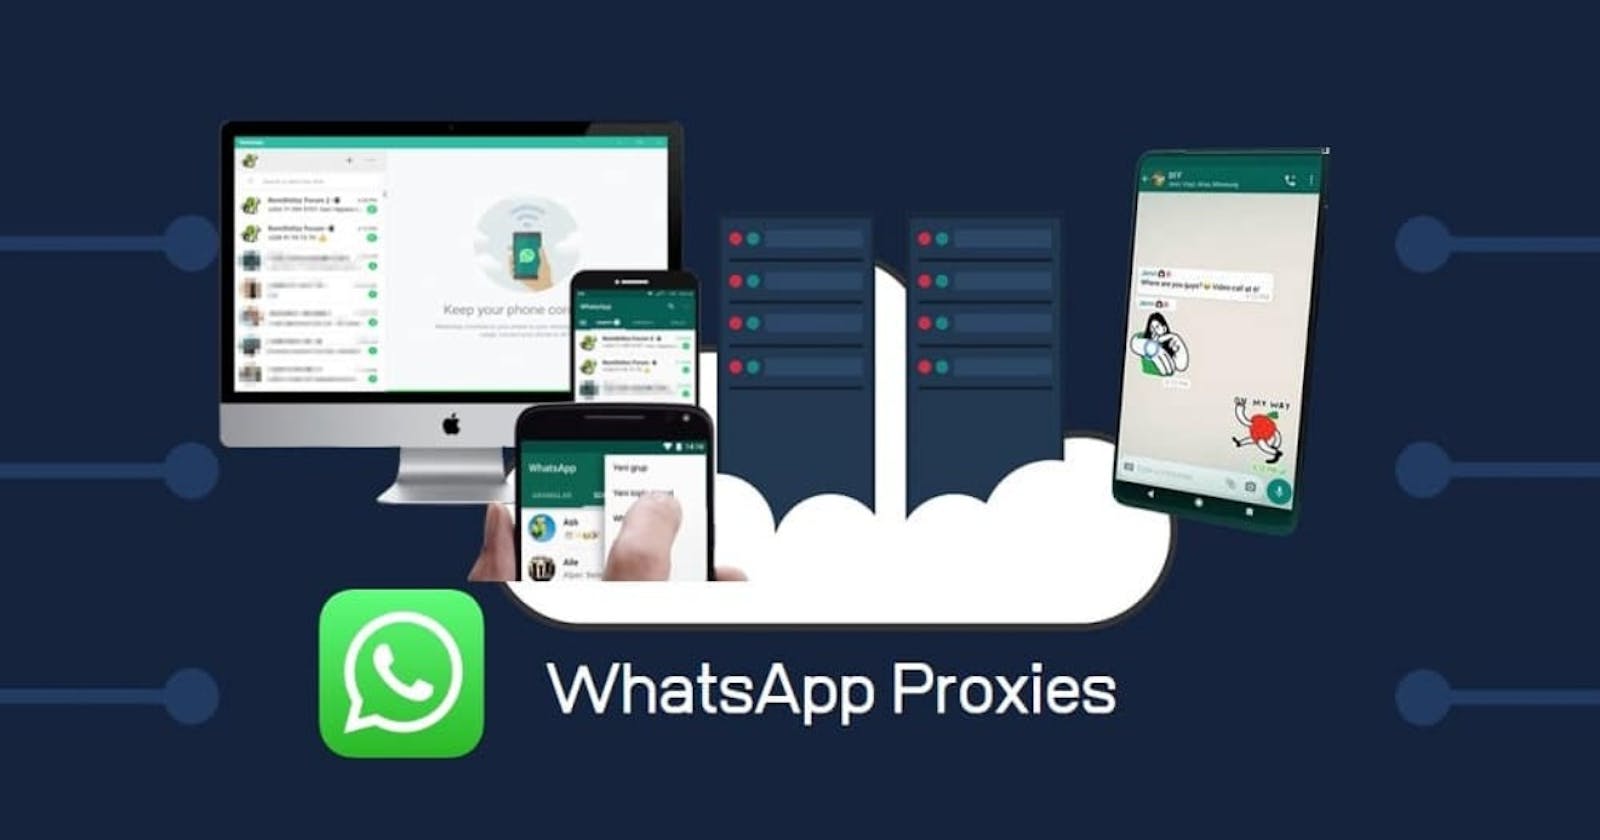 WhatsApp introduces proxy server connectivity to bypass ban, internet shutdown